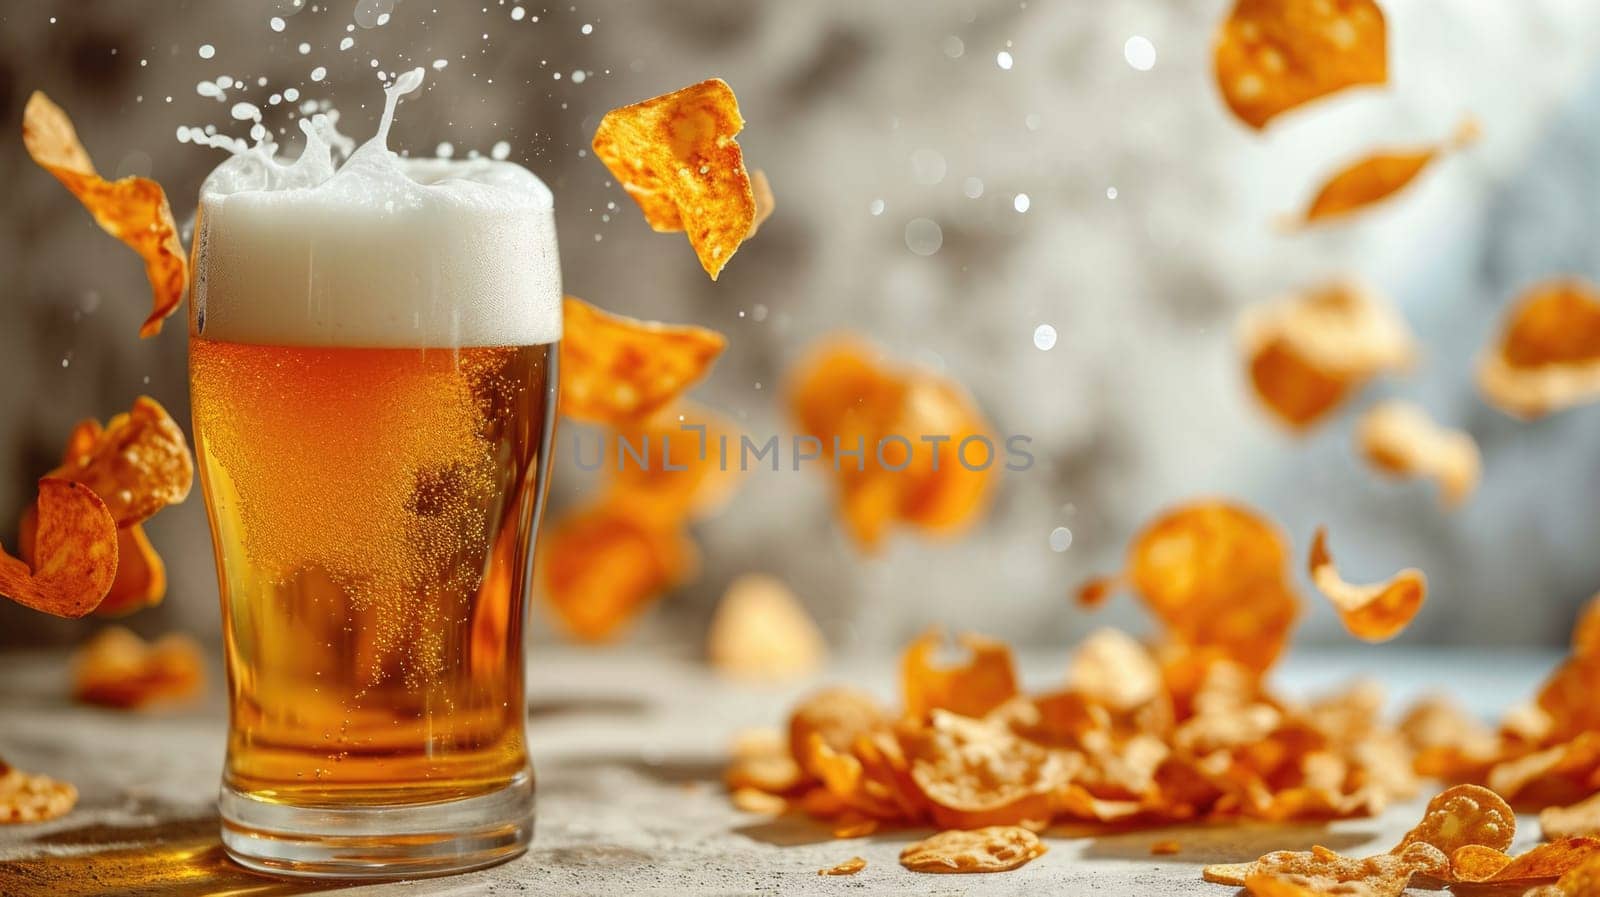 Fascinating image: chips hover over a glass of beer, creating an amazing effect of levitation and magic, inspiring fantasies and creative ideas.